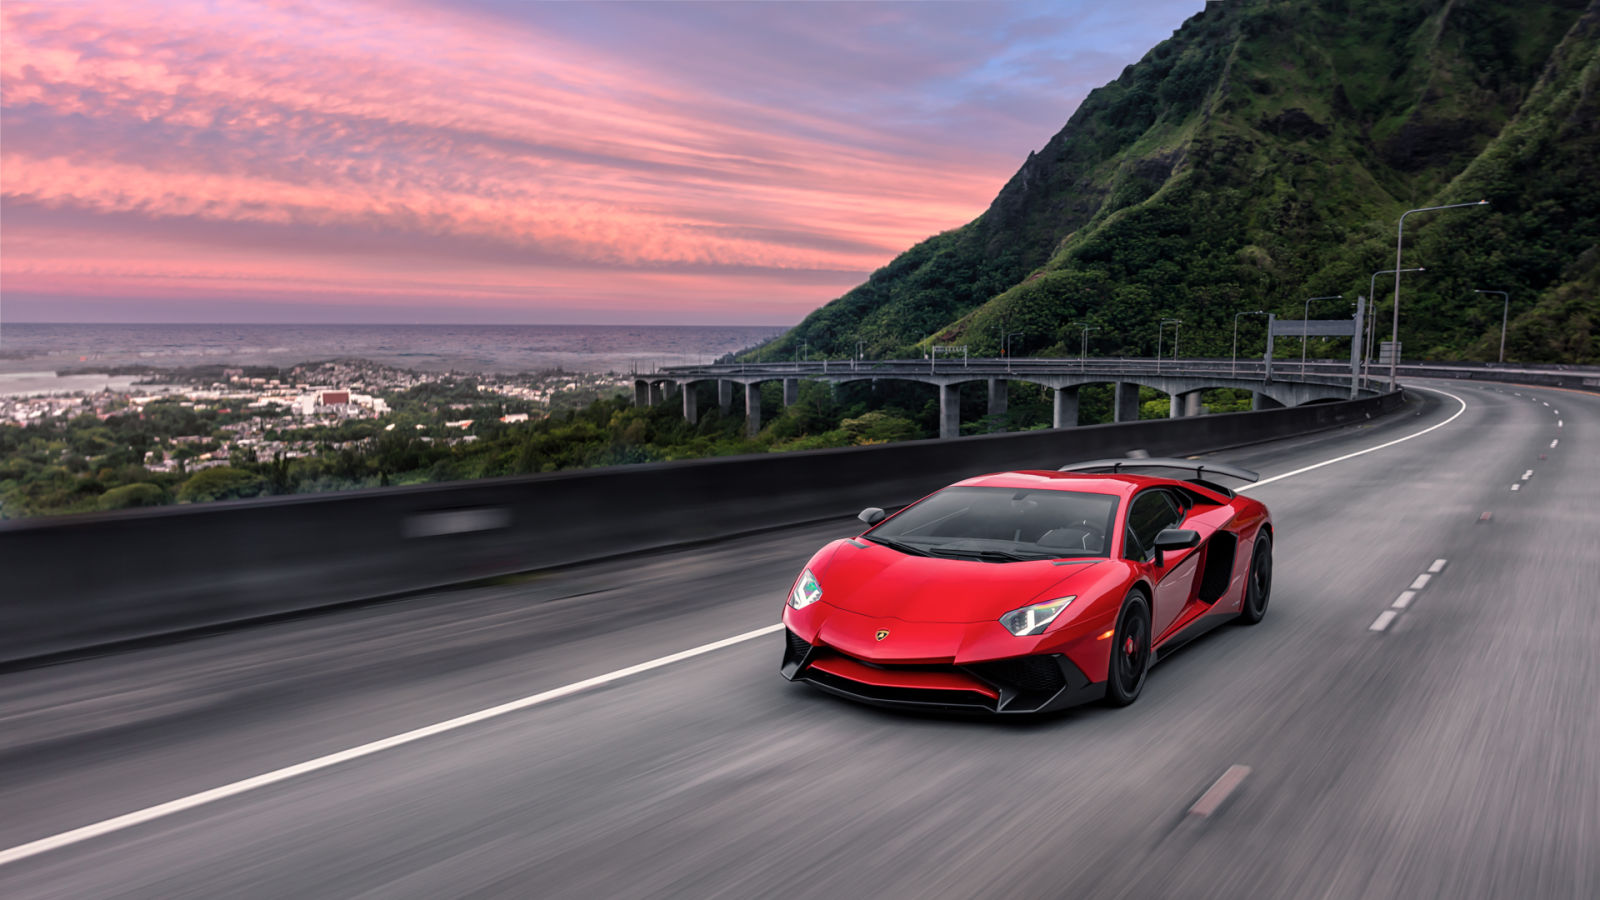 Your Ridiculously Awesome Lambhini Aventador Sv Wallpaper Are Here